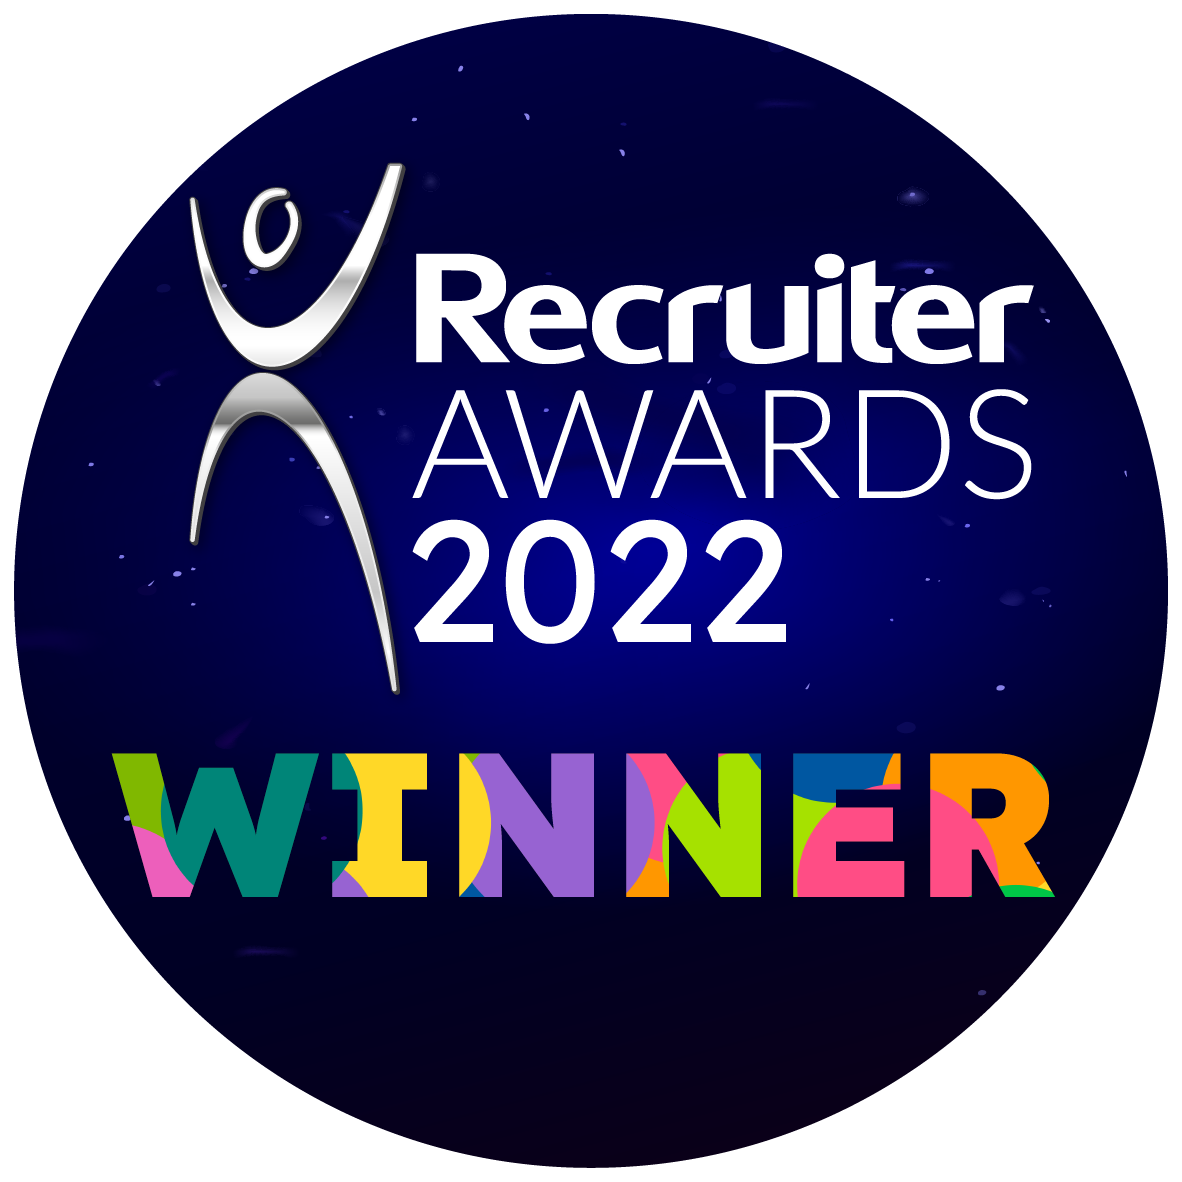 Winners of Best IT / Technology Recruitment Agency at The Recruiter Awards